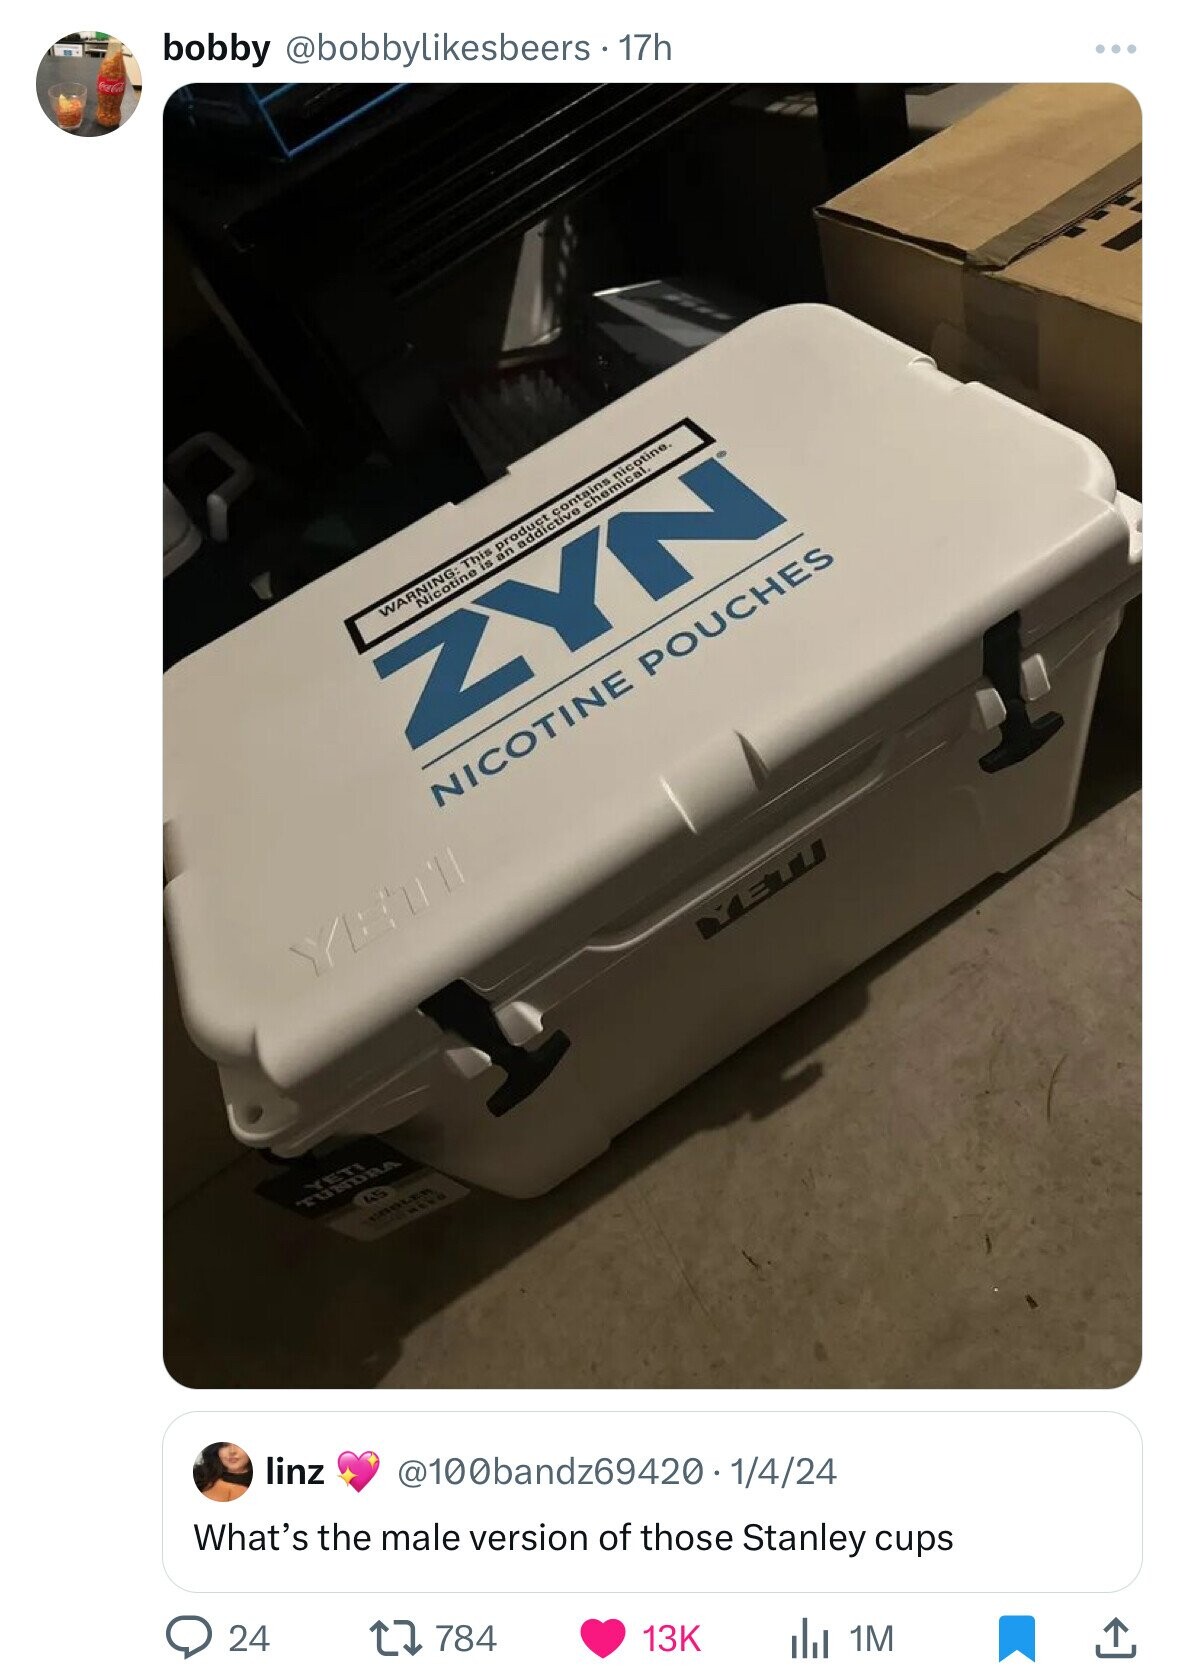 zyn yeti cooler - bobby . 17h 24 45 nicotine. ontains cal 3 This WARNIine is an addie Zyn luct coche 1784 Nicotine Pouches linz .1424 What's the male version of those Stanley cups 13K 1M Ketu